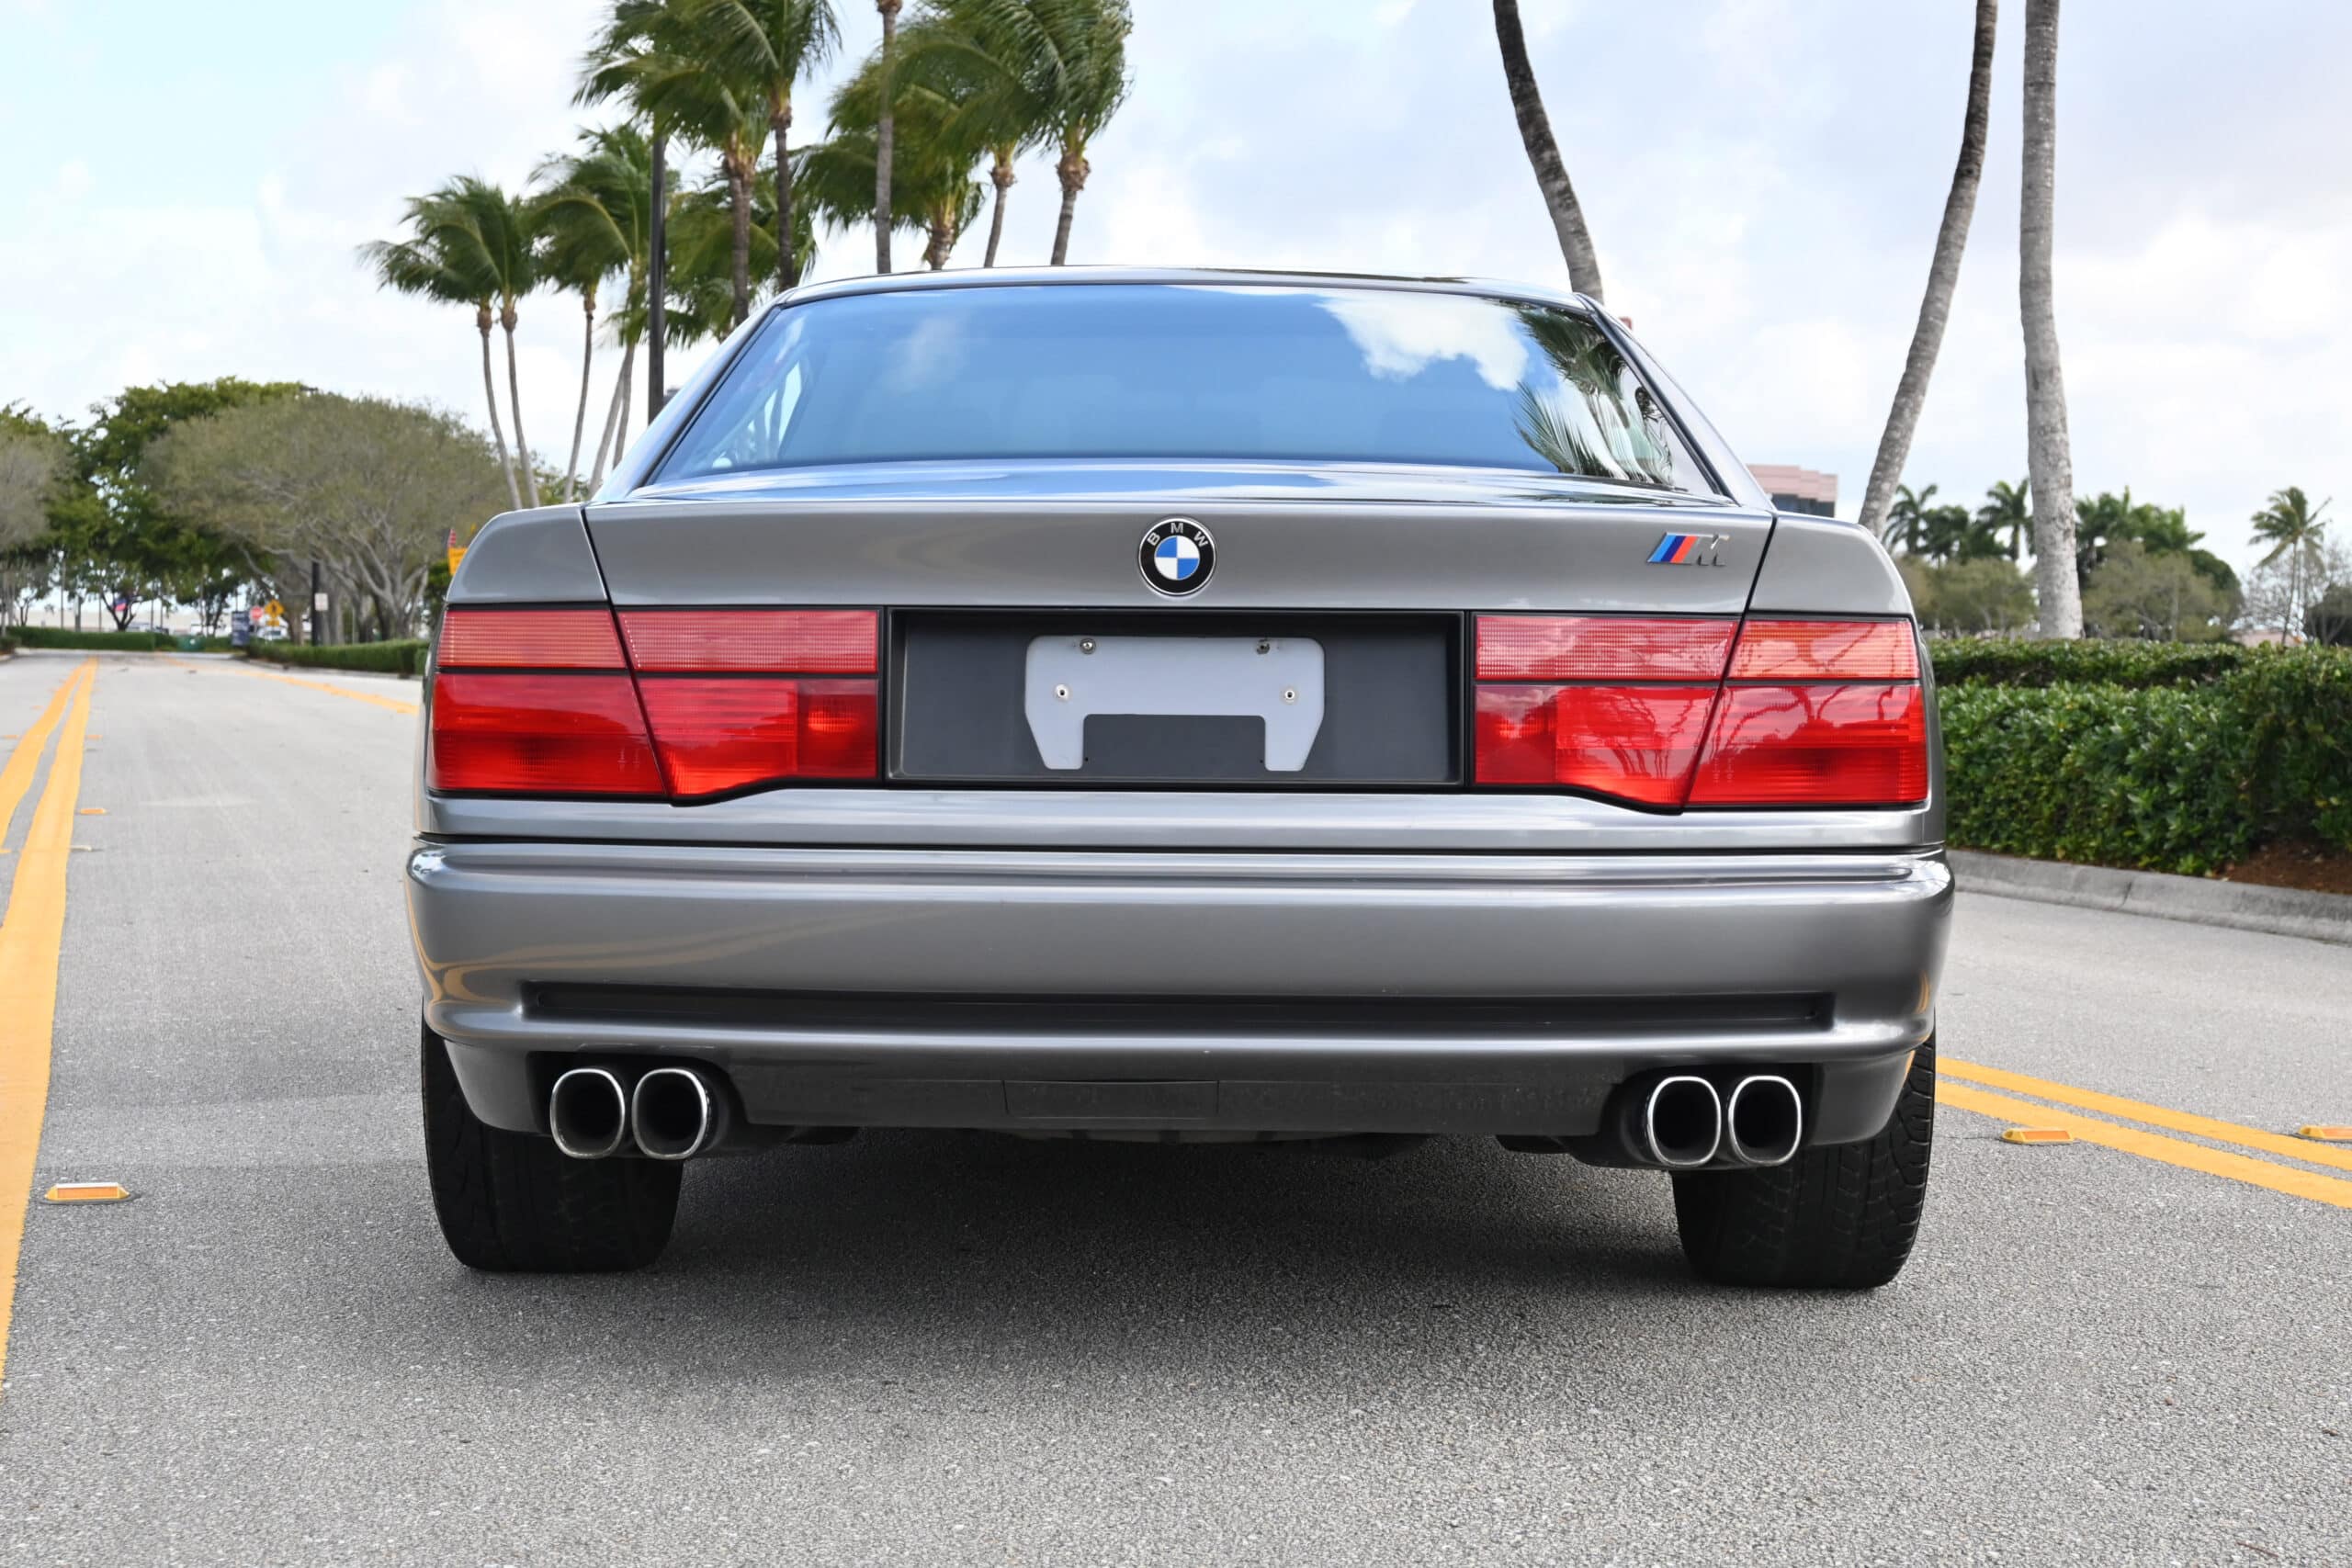 1991 BMW 850i, rare 6-speed, RoW vehicle, one of 427 Granite Silver E31s ever made, Sports Exhaust, cold A/C